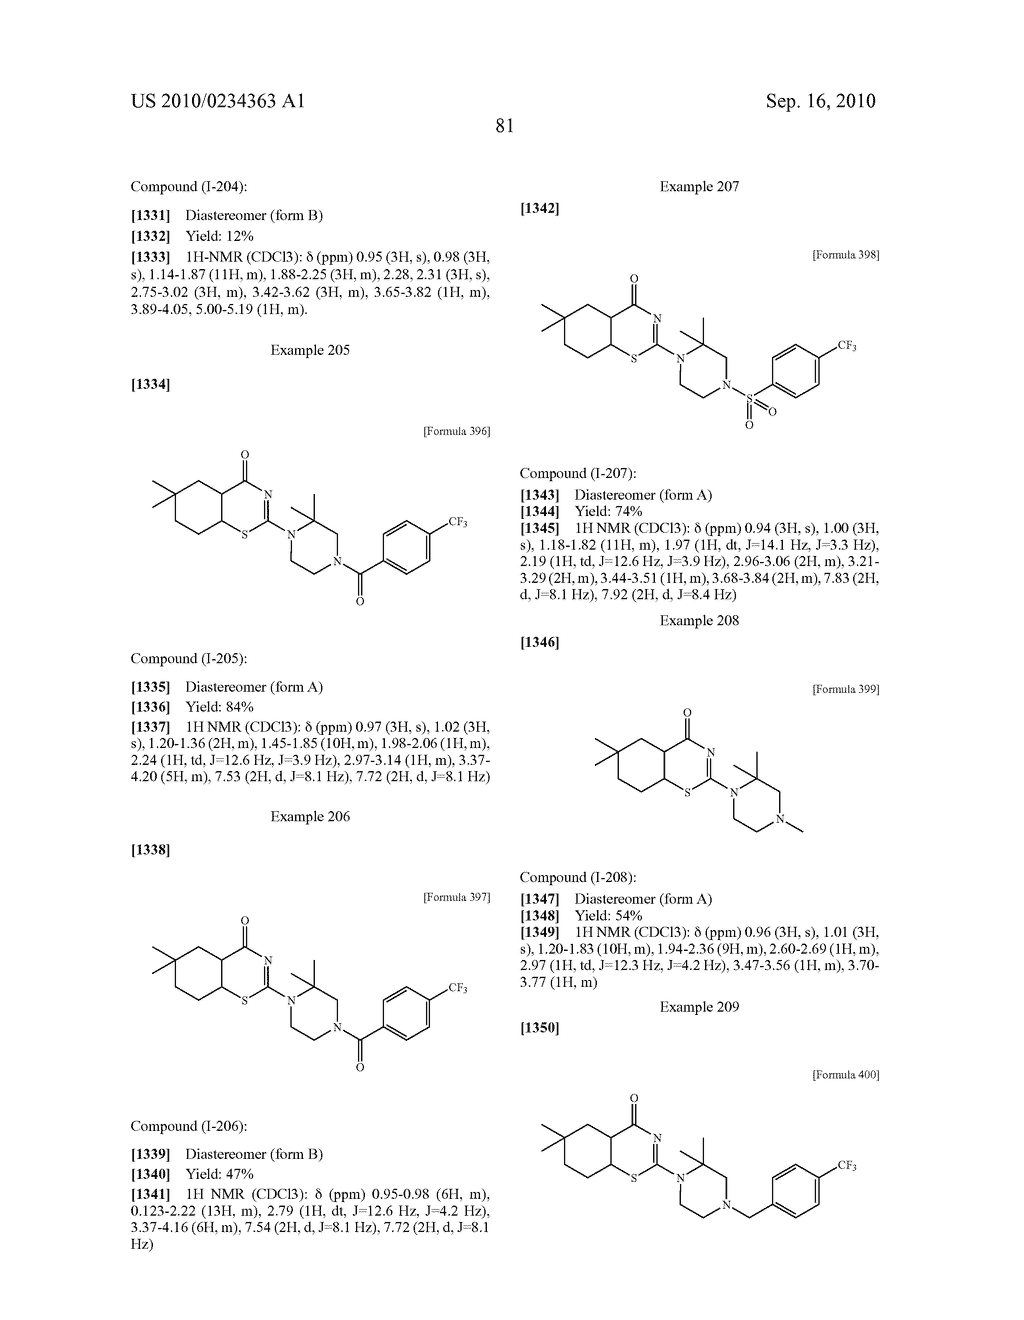 HETEROCYCLIC DERIVATIVE HAVING INHIBITORY ACTIVITY ON TYPE-I 11 DATA-HYDROXYSTEROID DEHYDROGENASE - diagram, schematic, and image 82